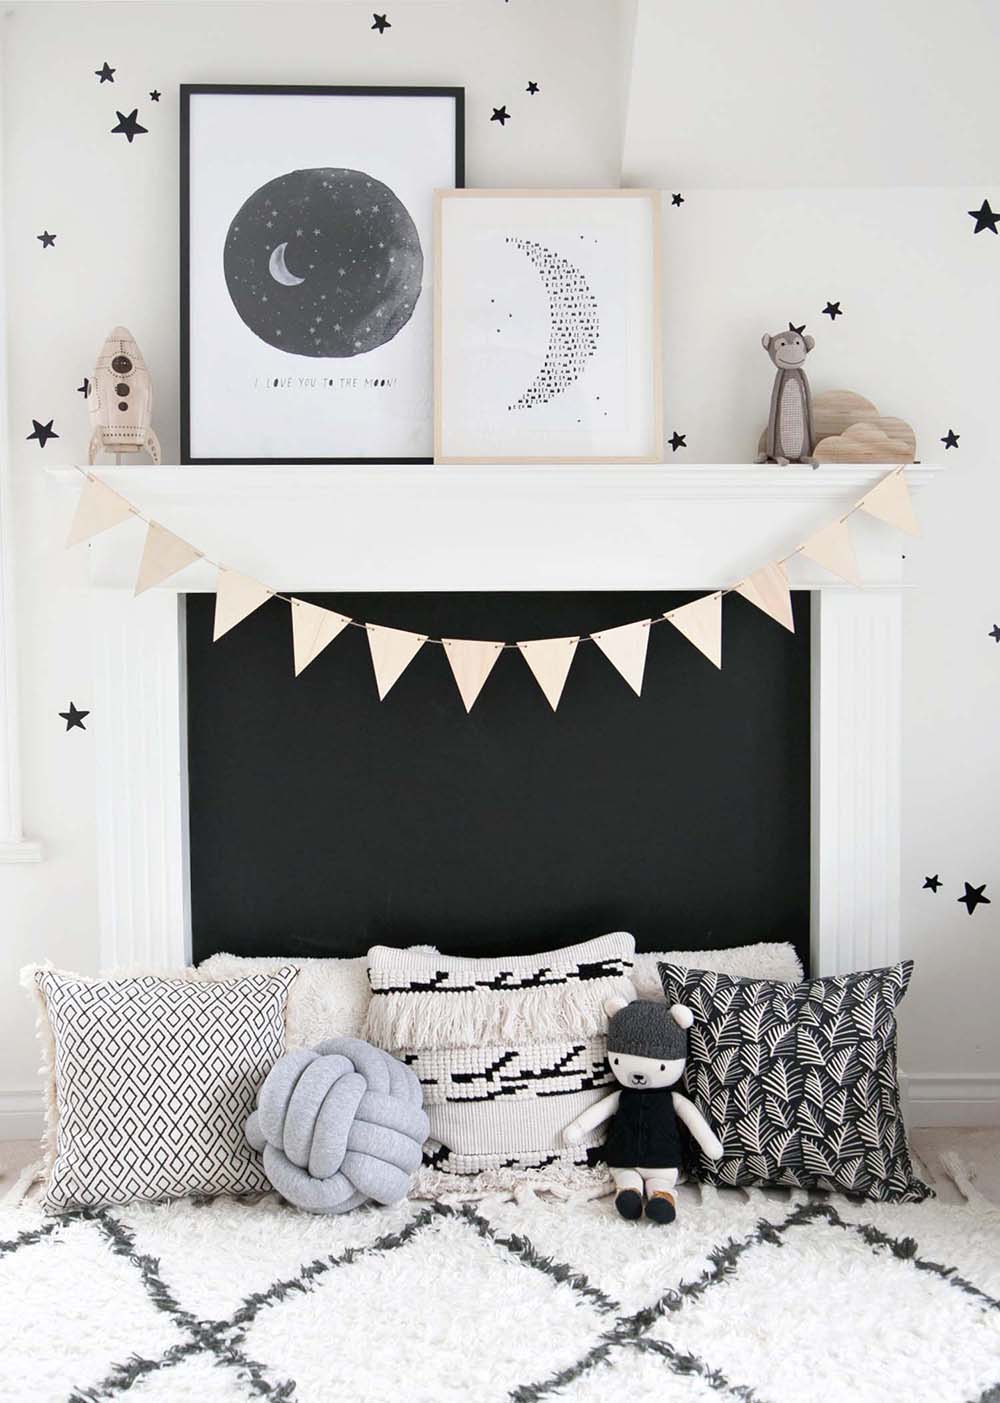 5 Unique Ways To Use Chalkboard Paint In Kids Spaces Winter Daisy Melissa Barling Kids Interior Decorator Lifestyle Blogger